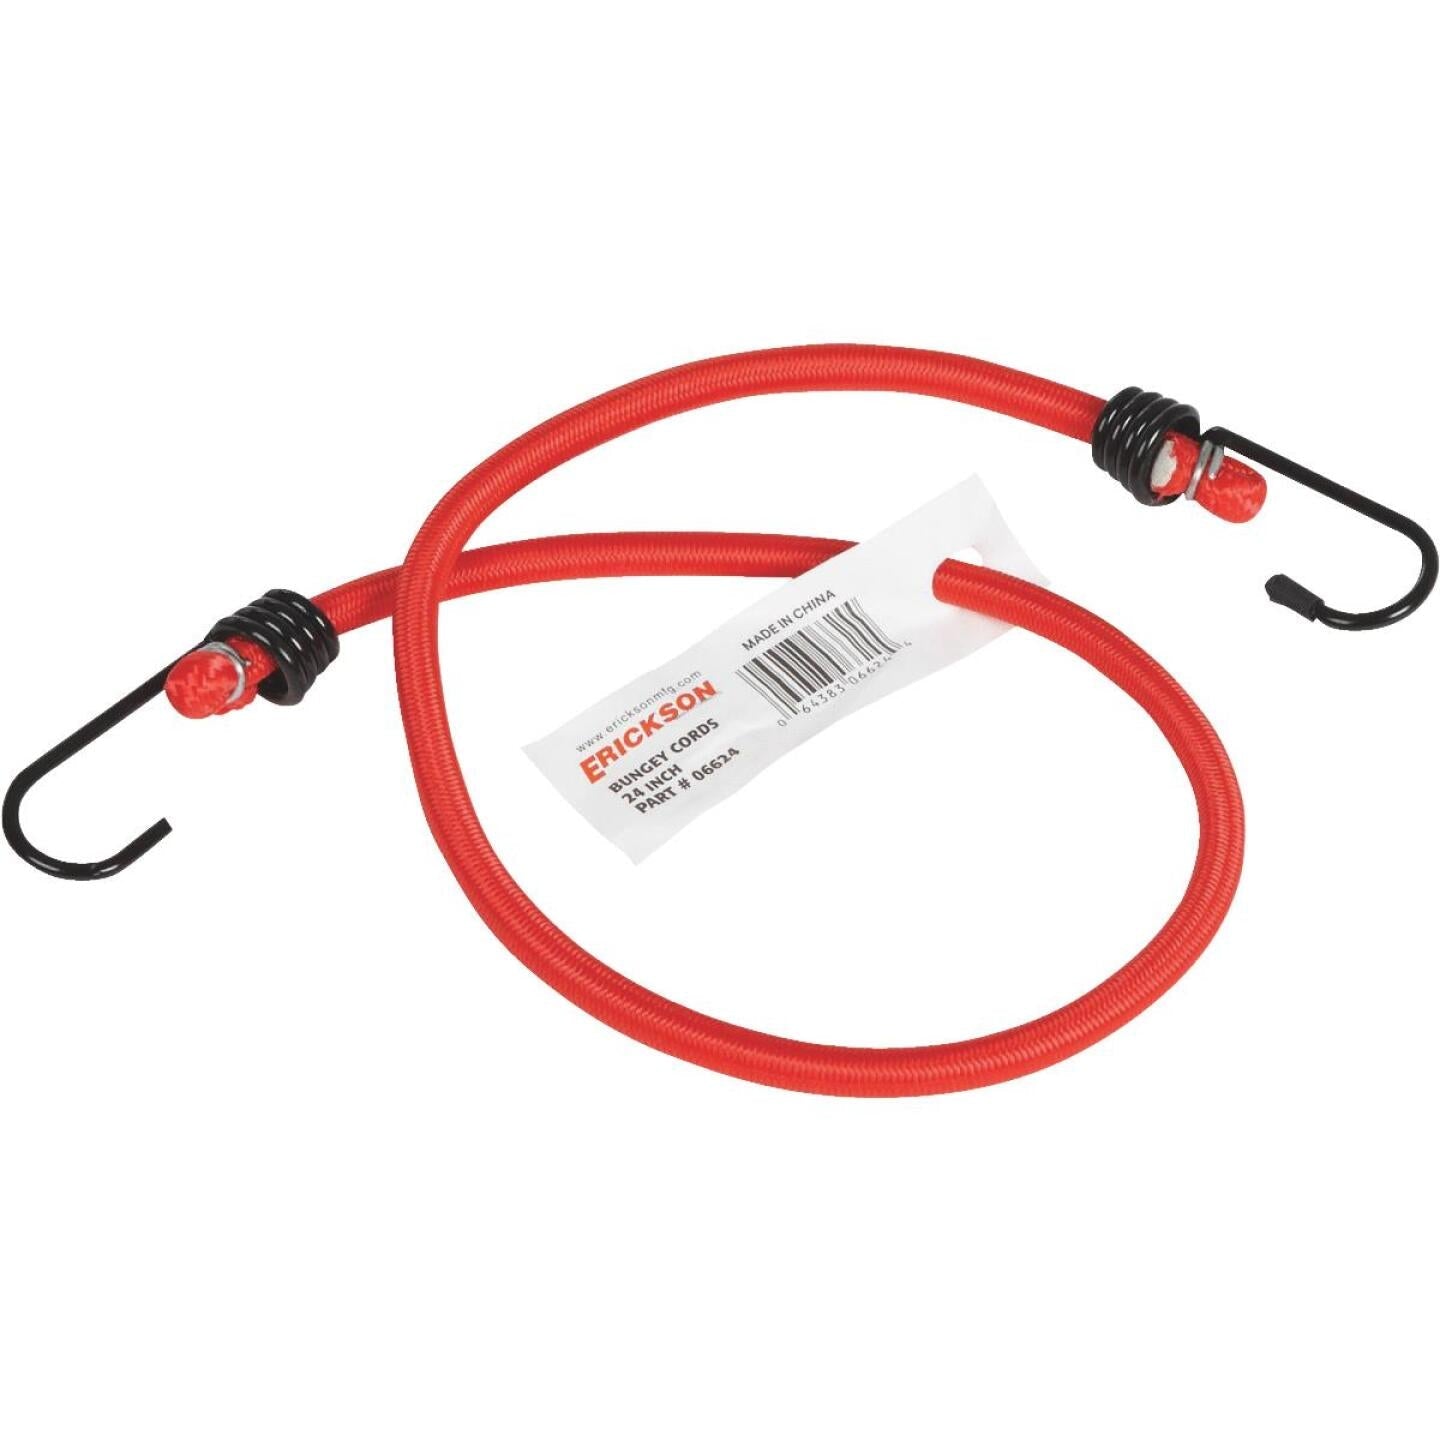 Erickson, Erickson 1/4 In. x 24 In. Bungee Cord, Assorted Colors